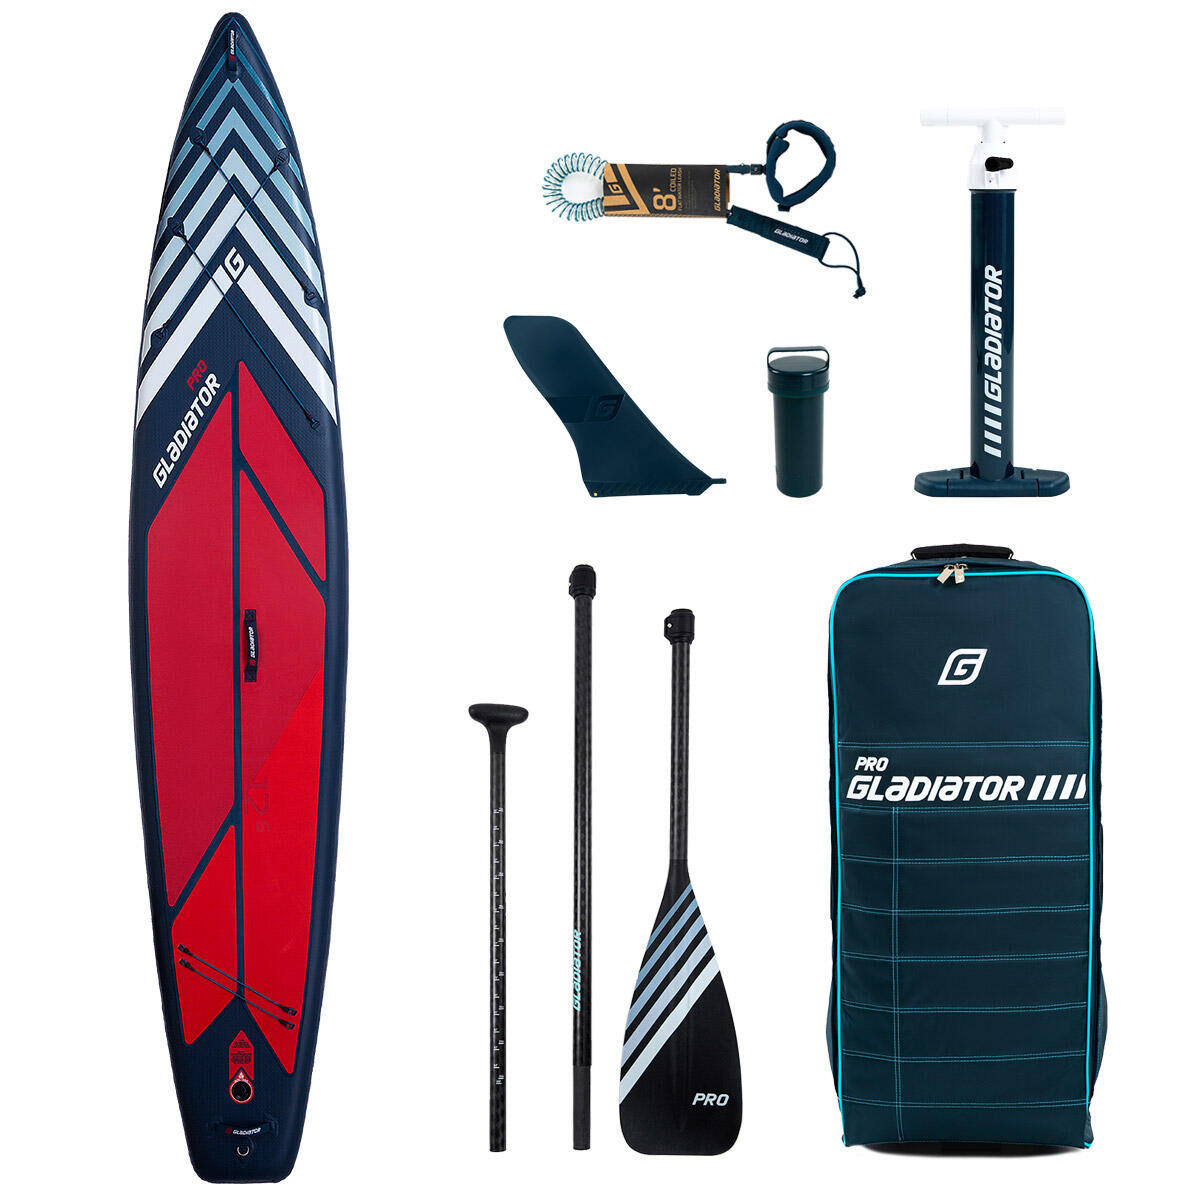 GLADIATOR Pro 12'6 LIGHT INFLATABLE STAND UP PADDLE BOARD - RED